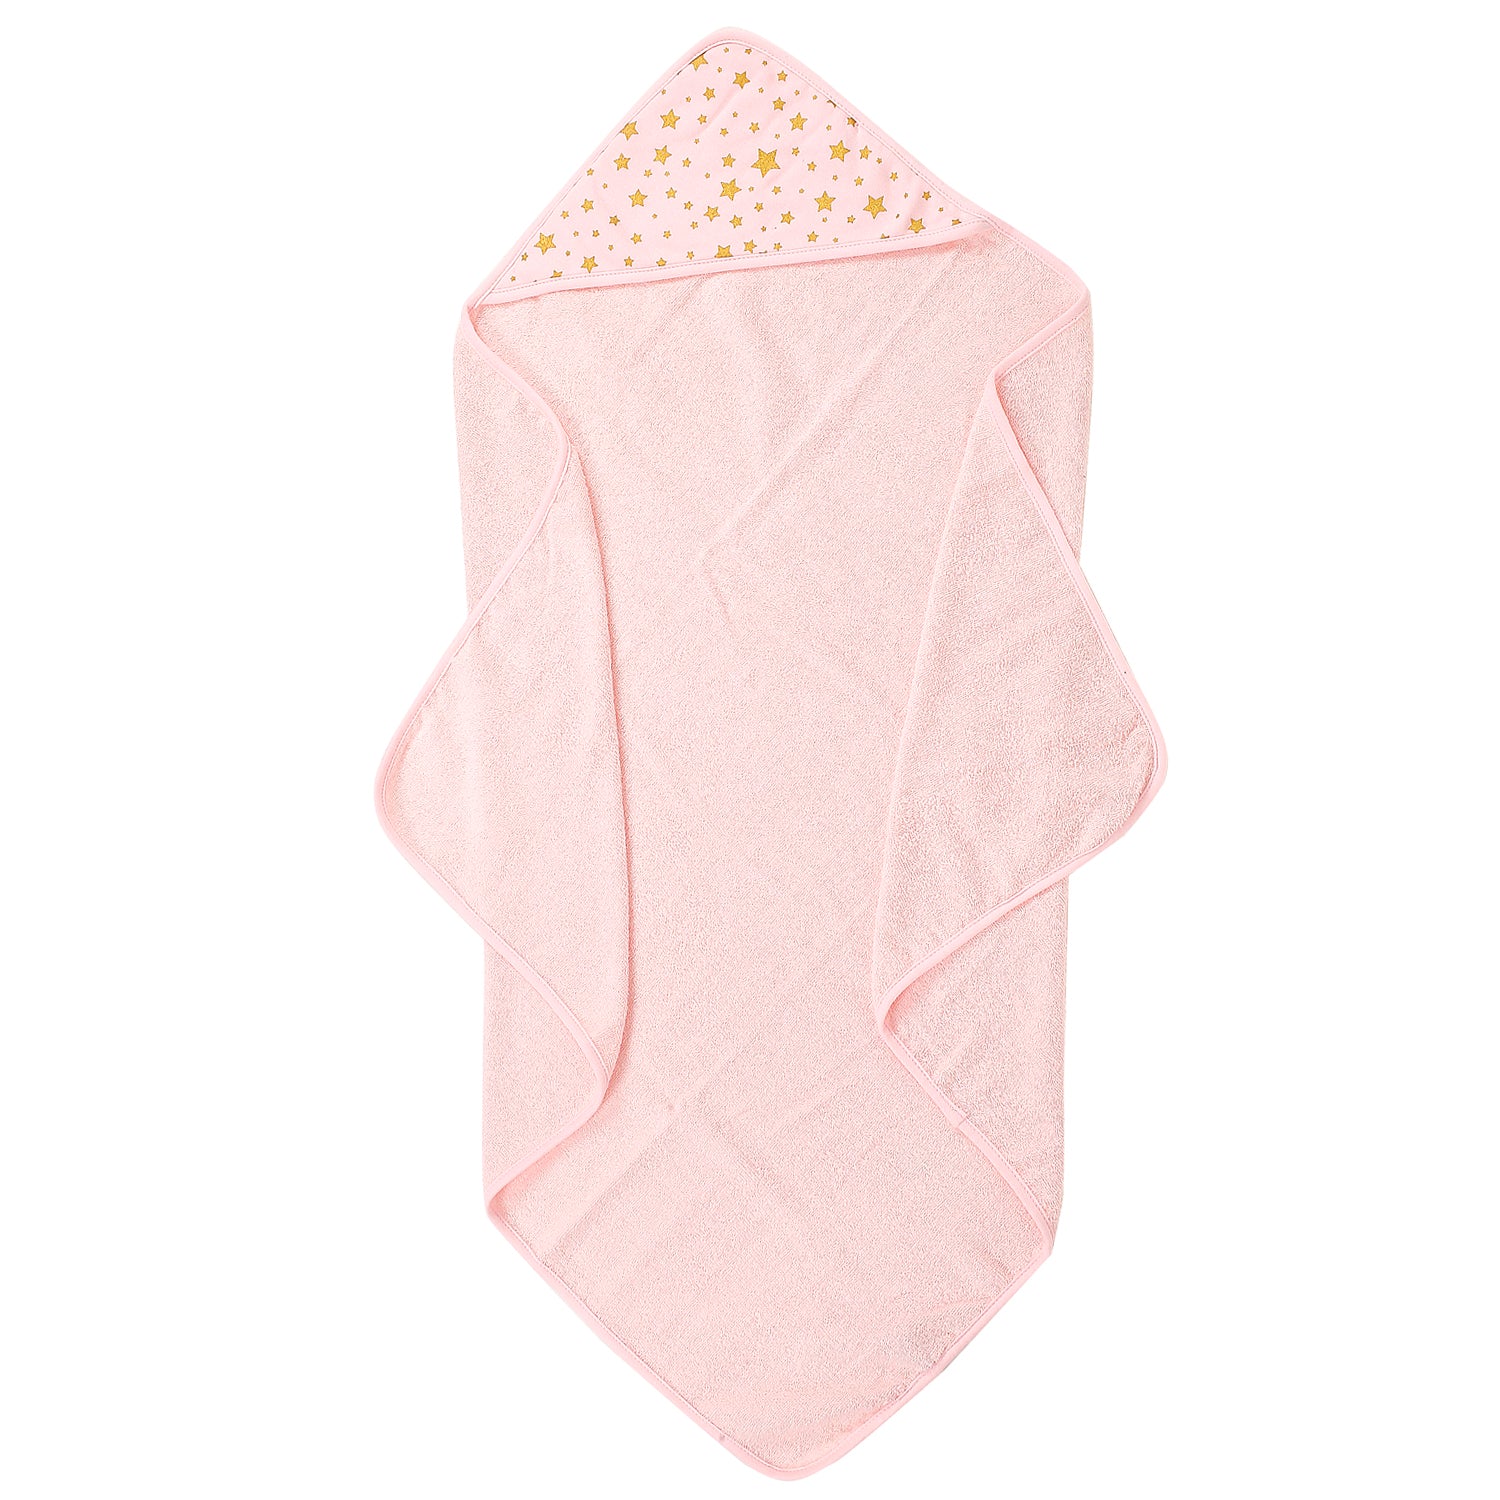 Starry Pink Hooded Towel & Wash Cloth Set - Baby Moo